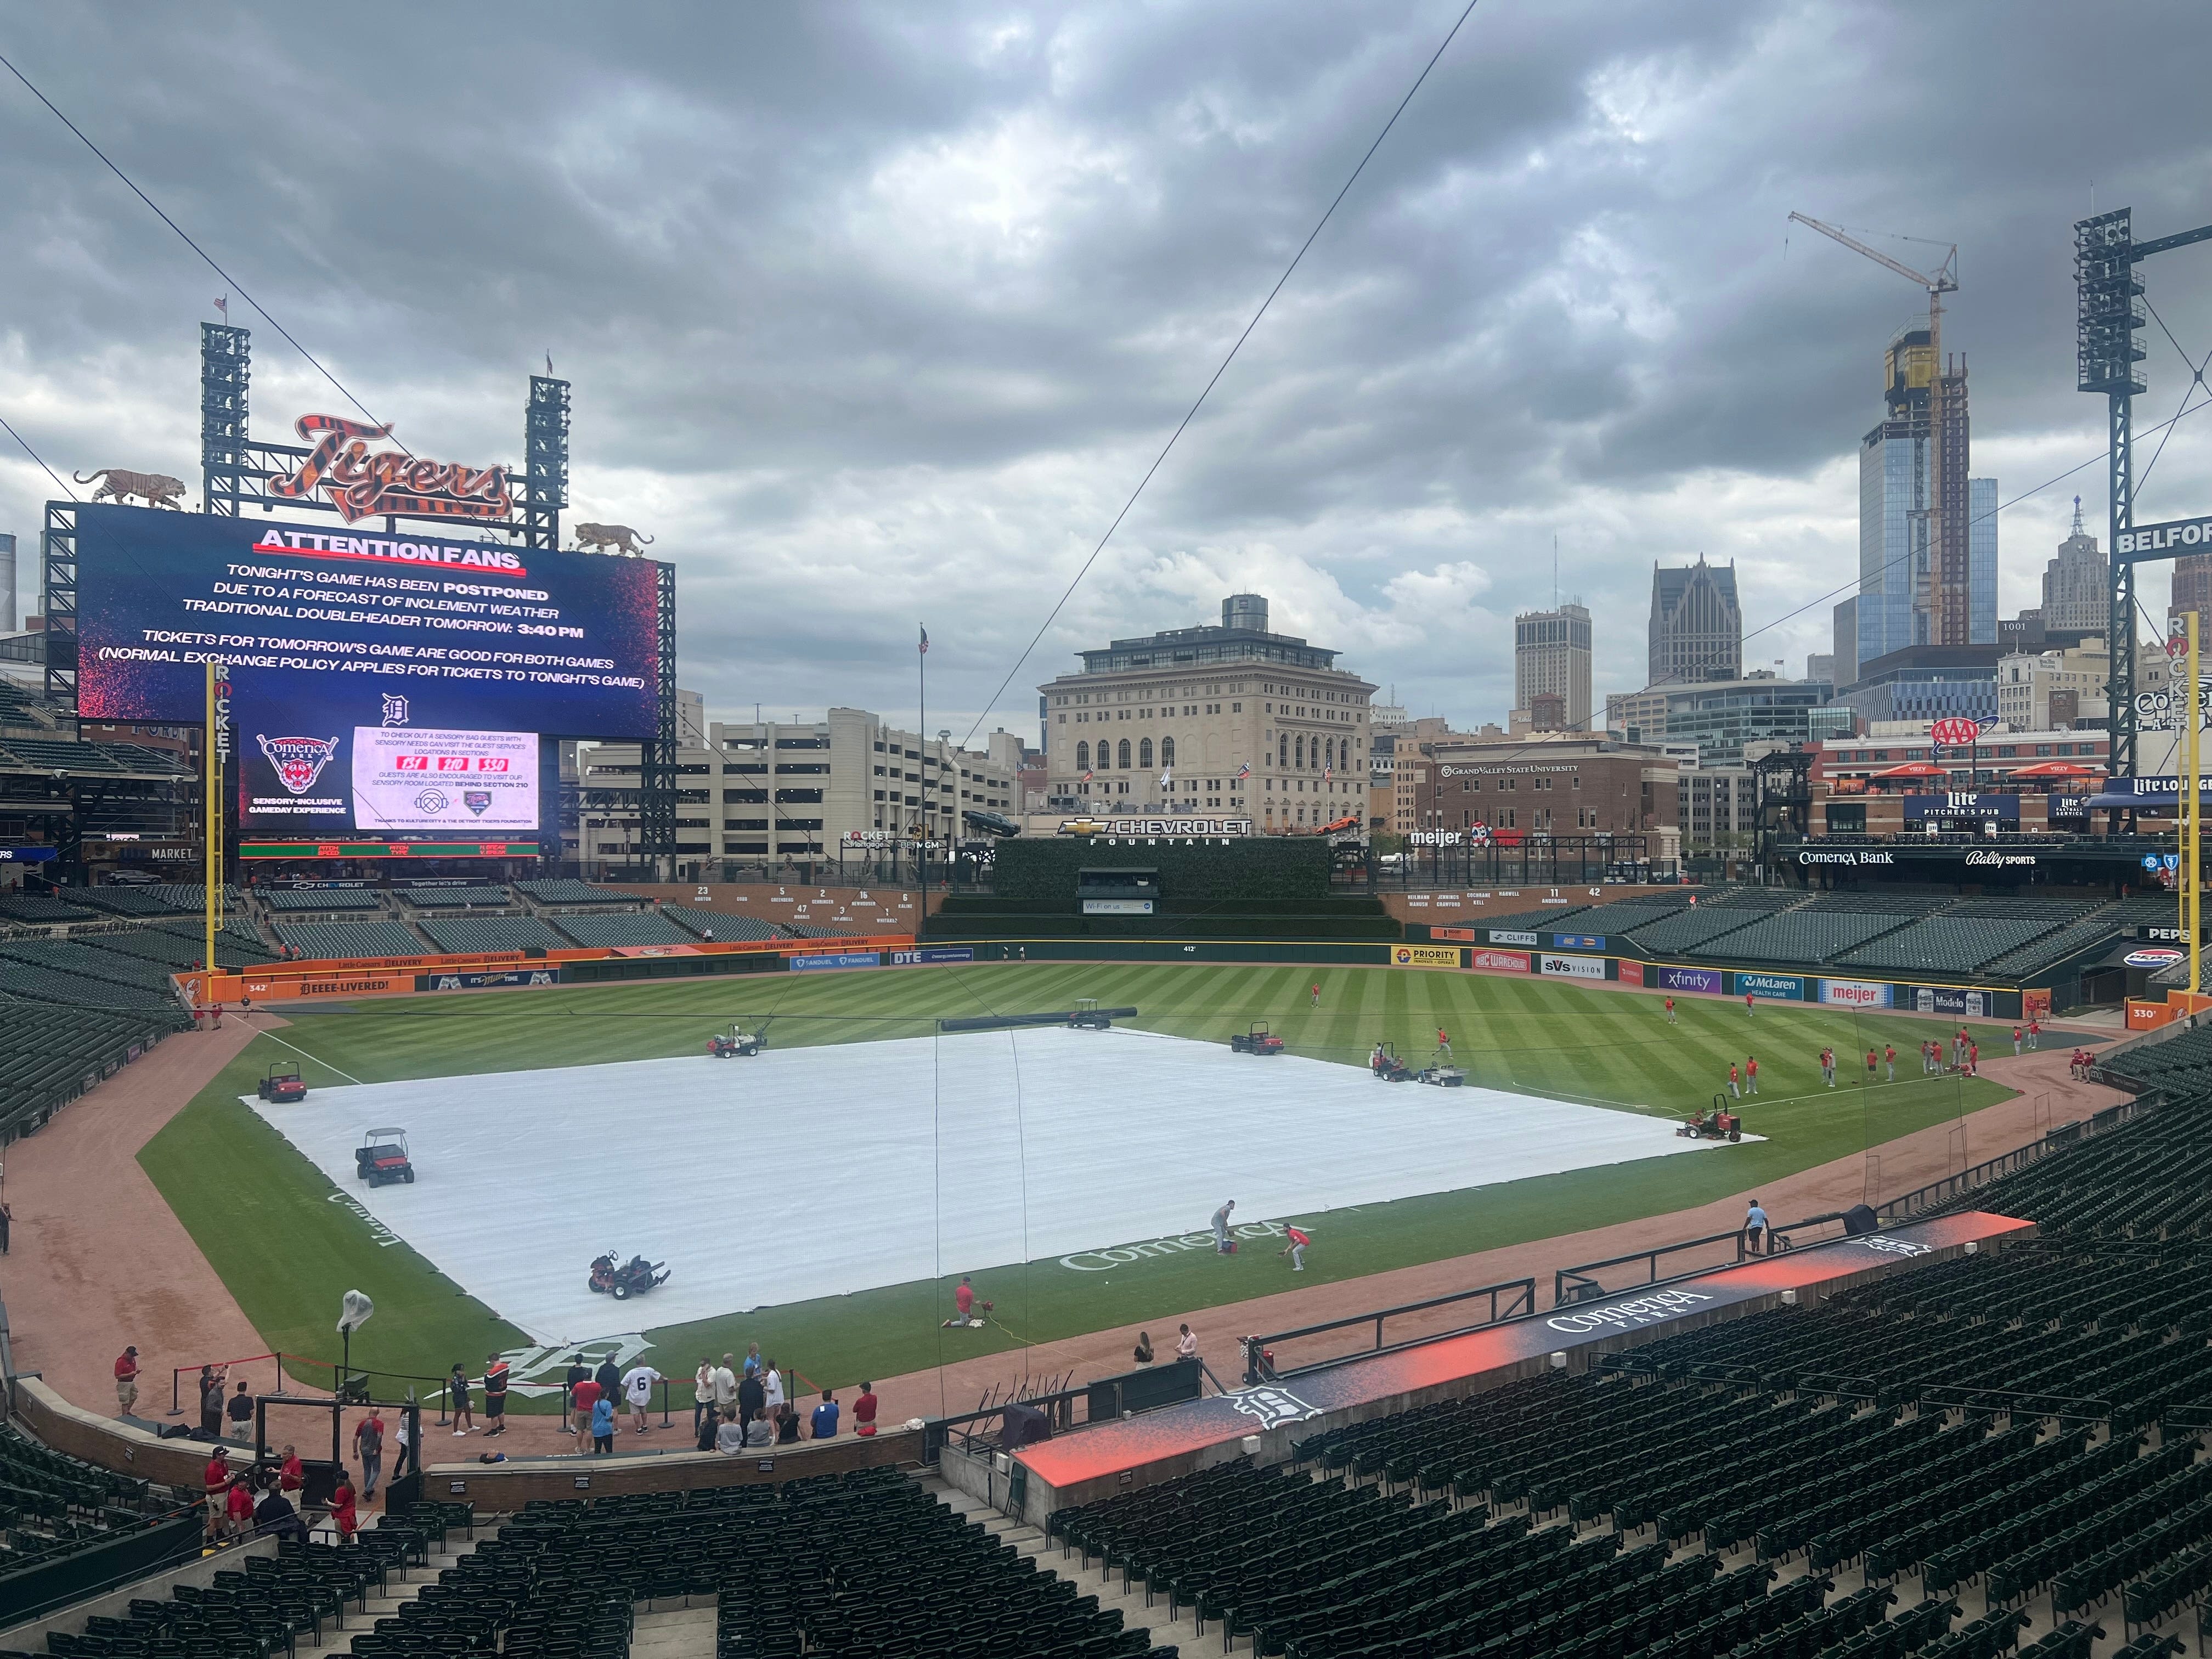 Detroit Tigers vs. Cardinals postponed Monday due to forecast of rain; doubleheader Tuesday